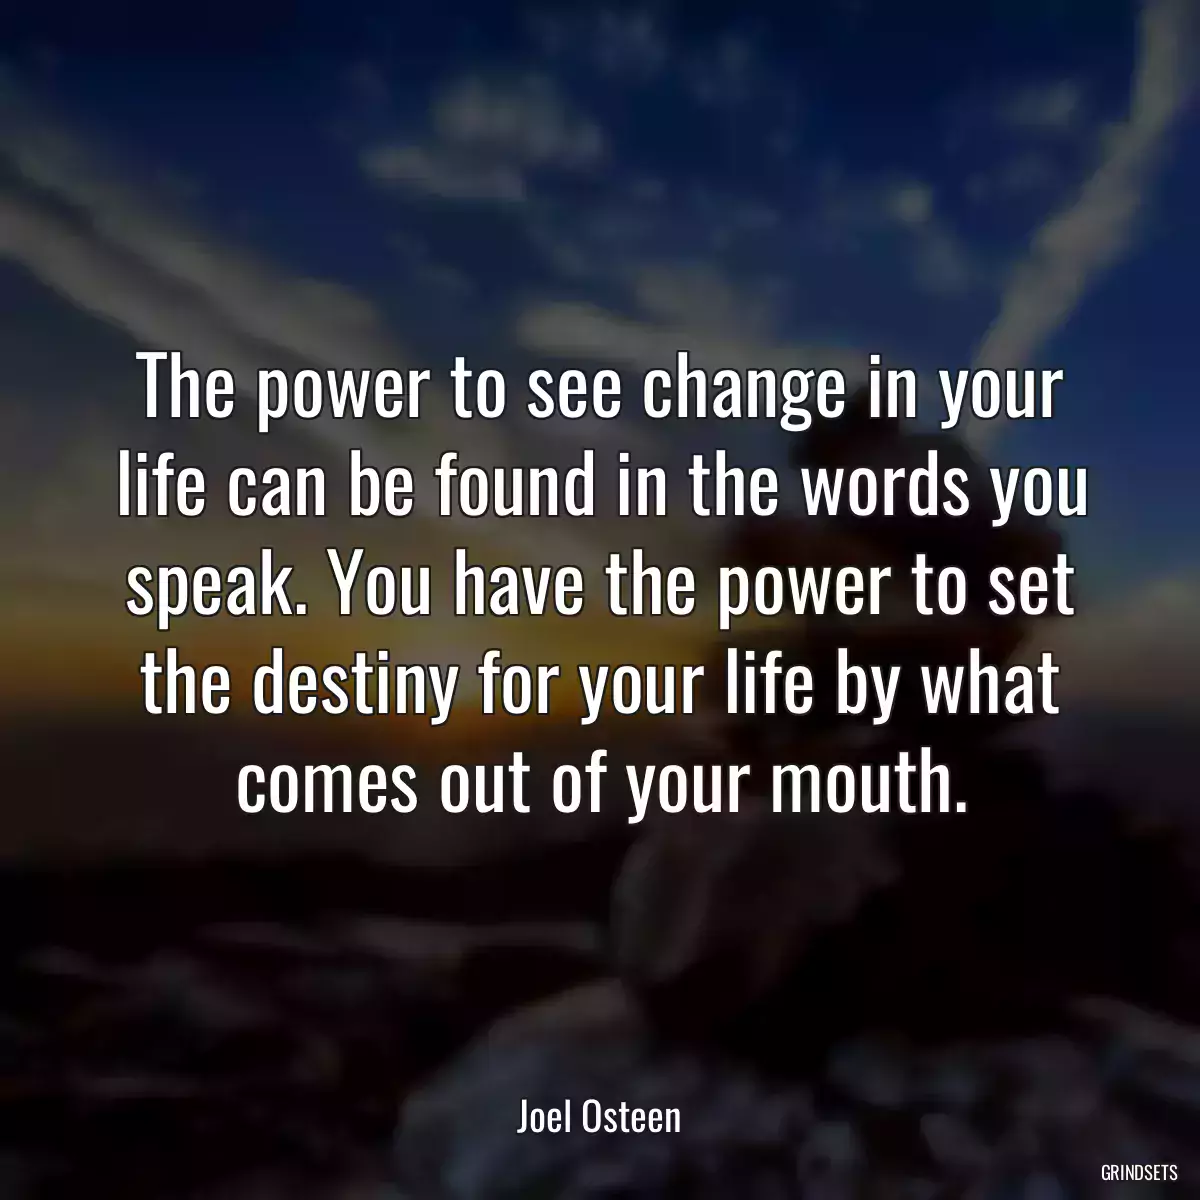 The power to see change in your life can be found in the words you speak. You have the power to set the destiny for your life by what comes out of your mouth.